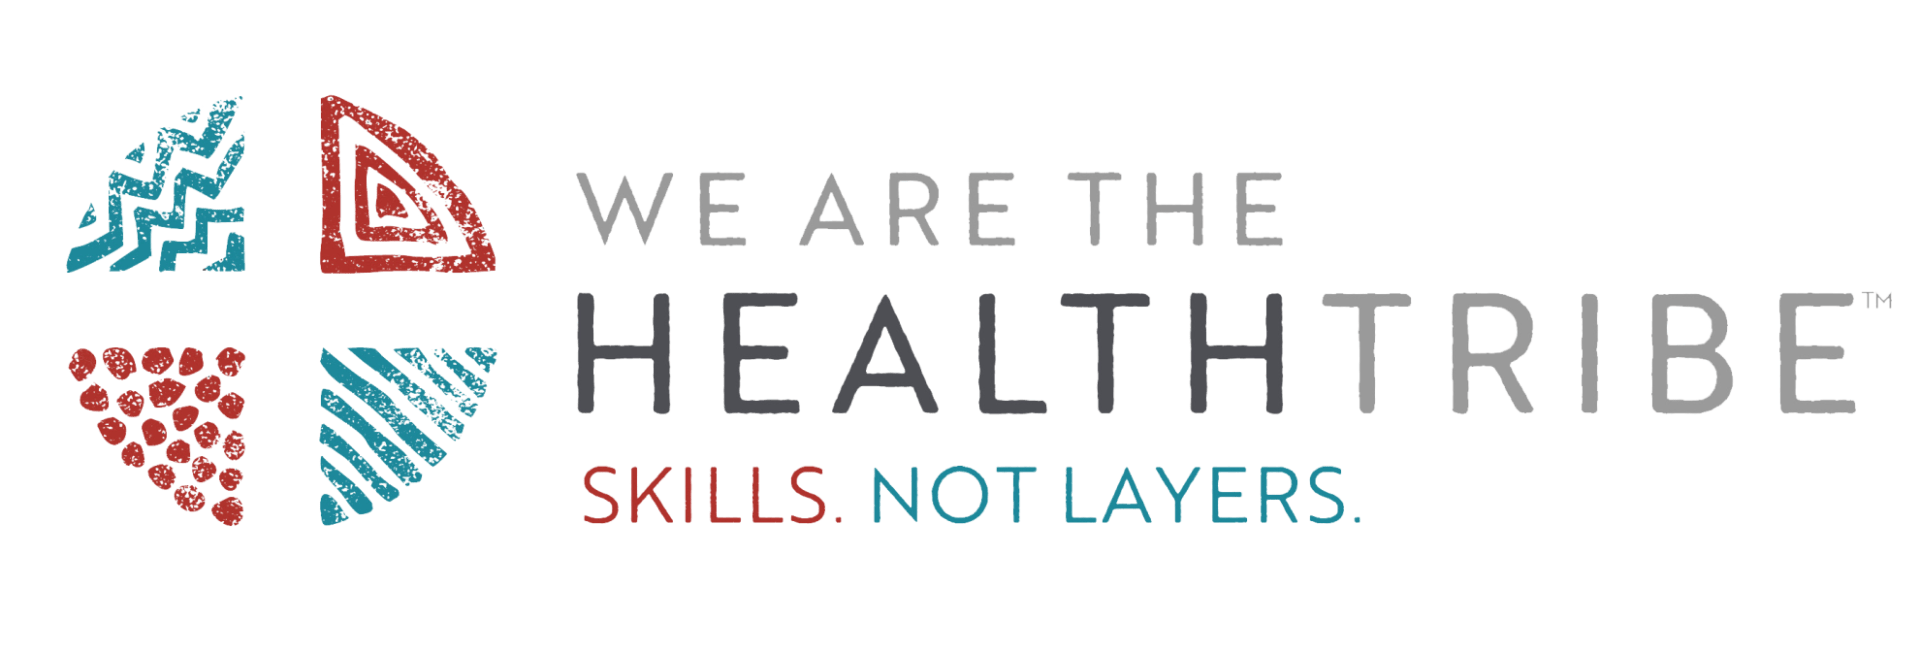 We are the healthtribe logo.